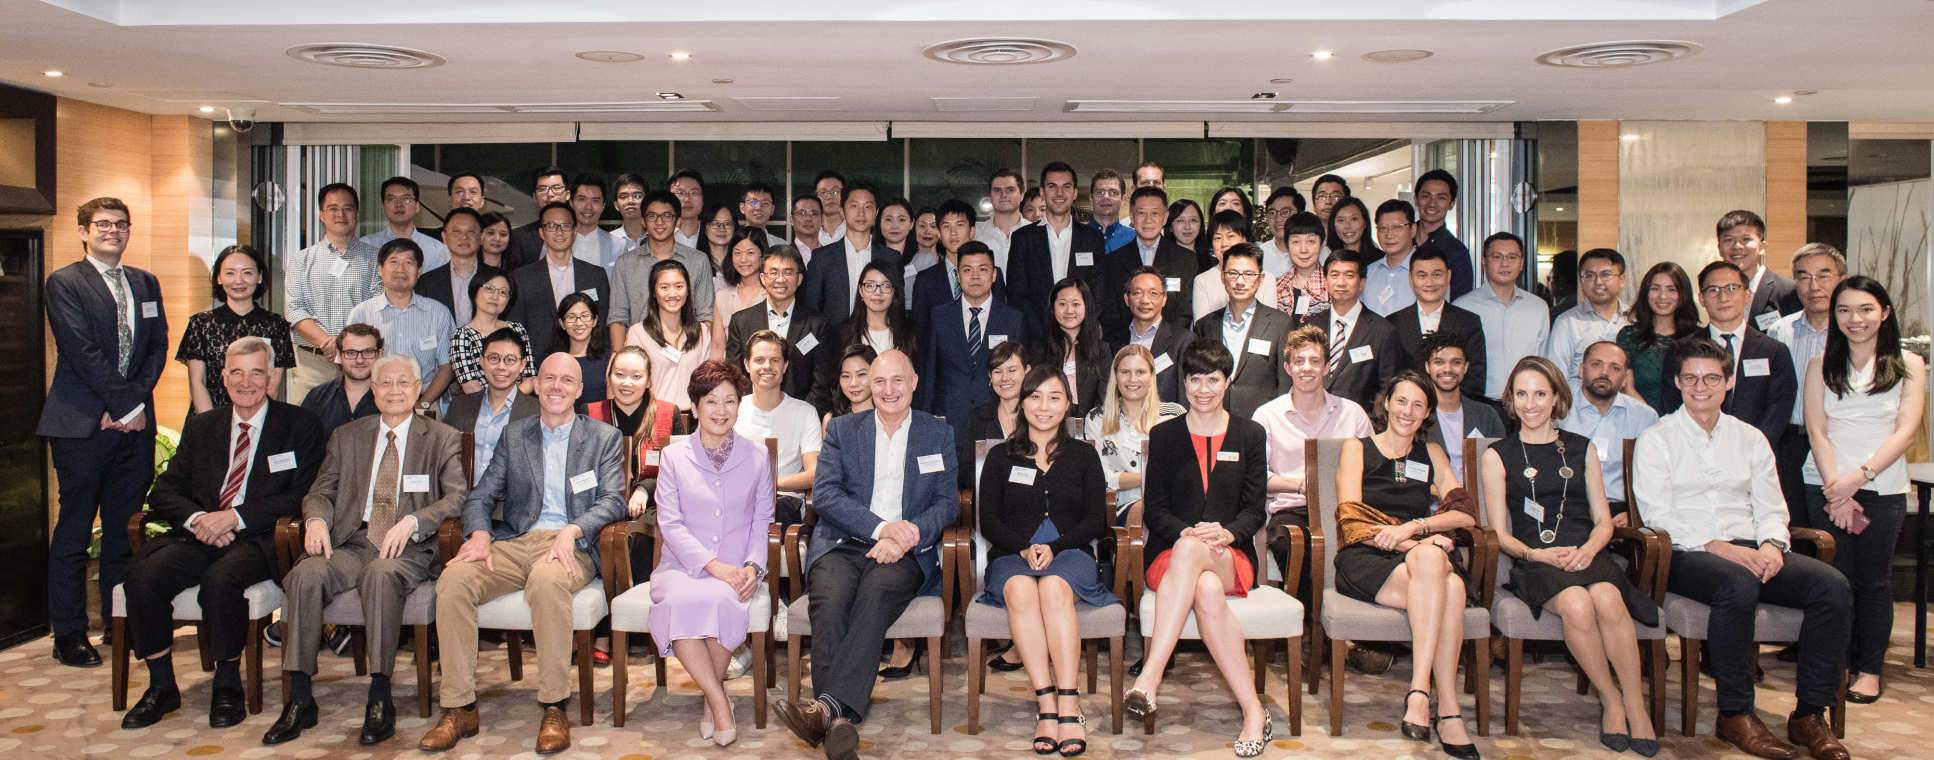 Imperial has nearly 3,000 alumni living in Hong Kong